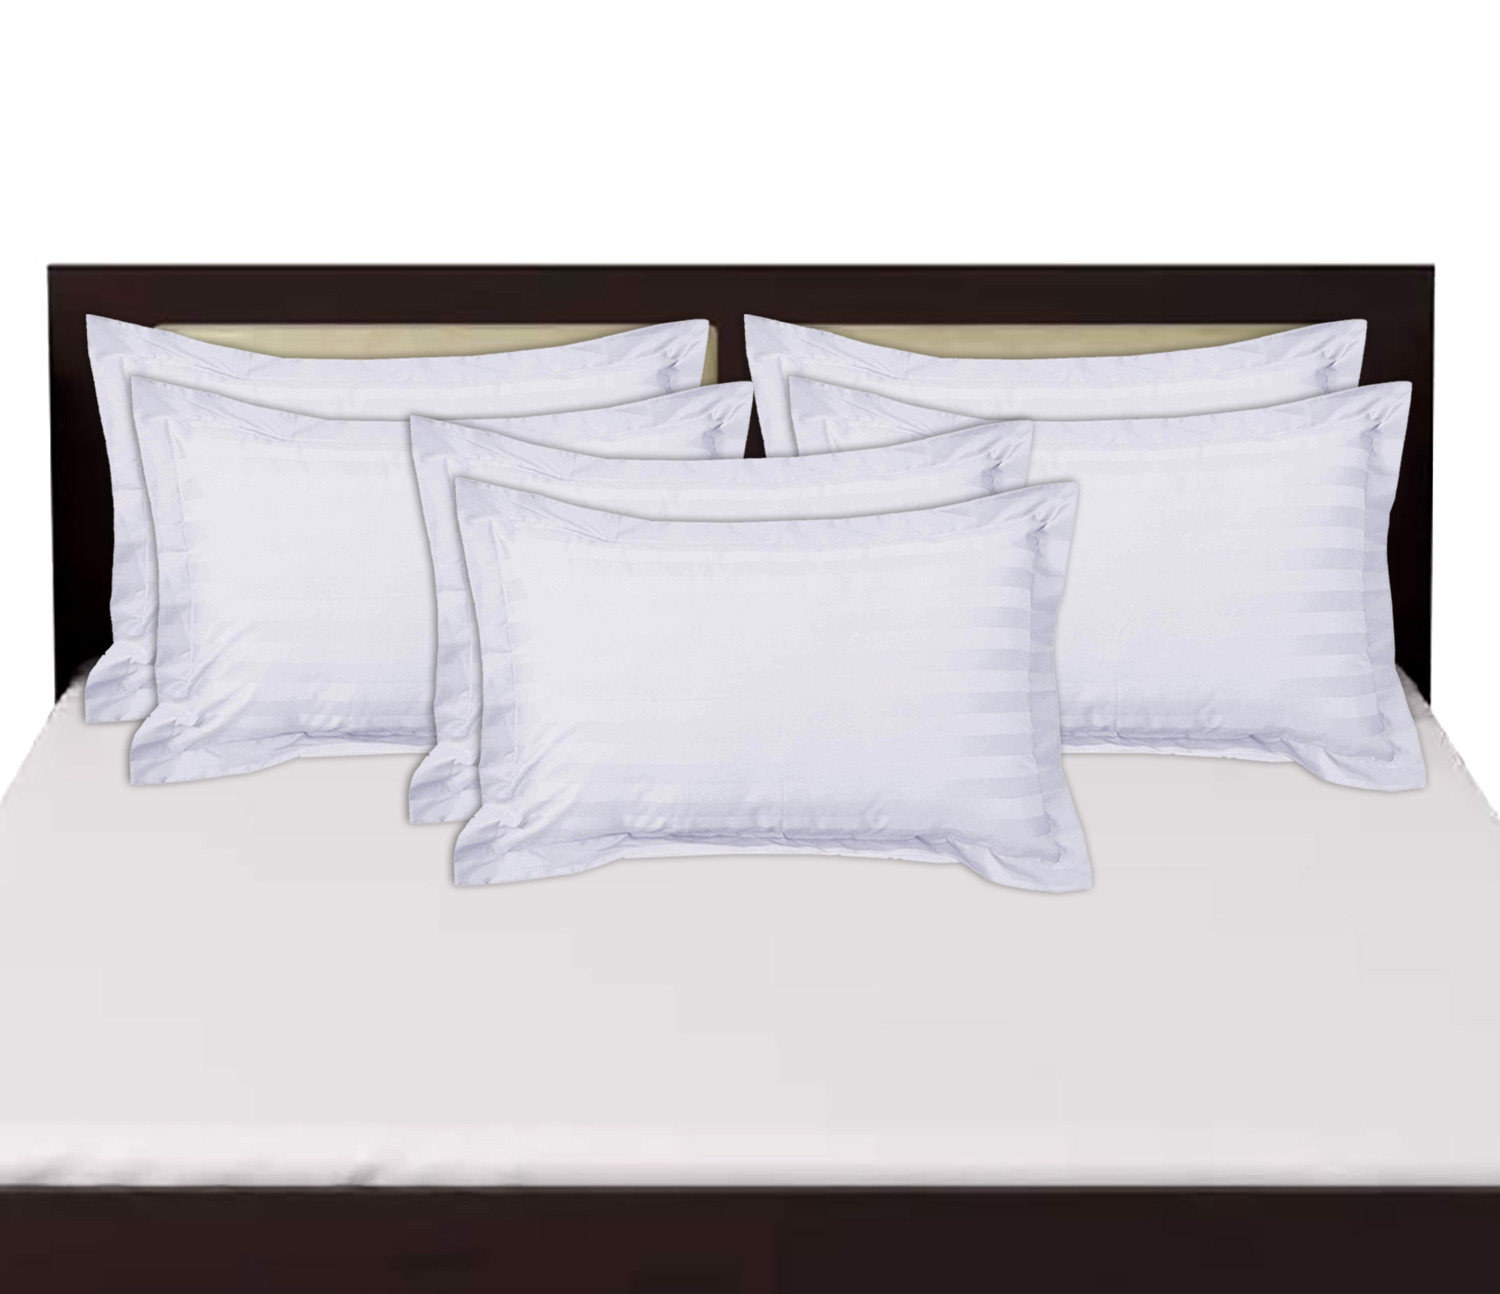 Kuber Industries Lining Design Breathable & Soft Cotton Pillow Cover/Protector/Case- 18x28 Inch,(White)-HS43KUBMART26779